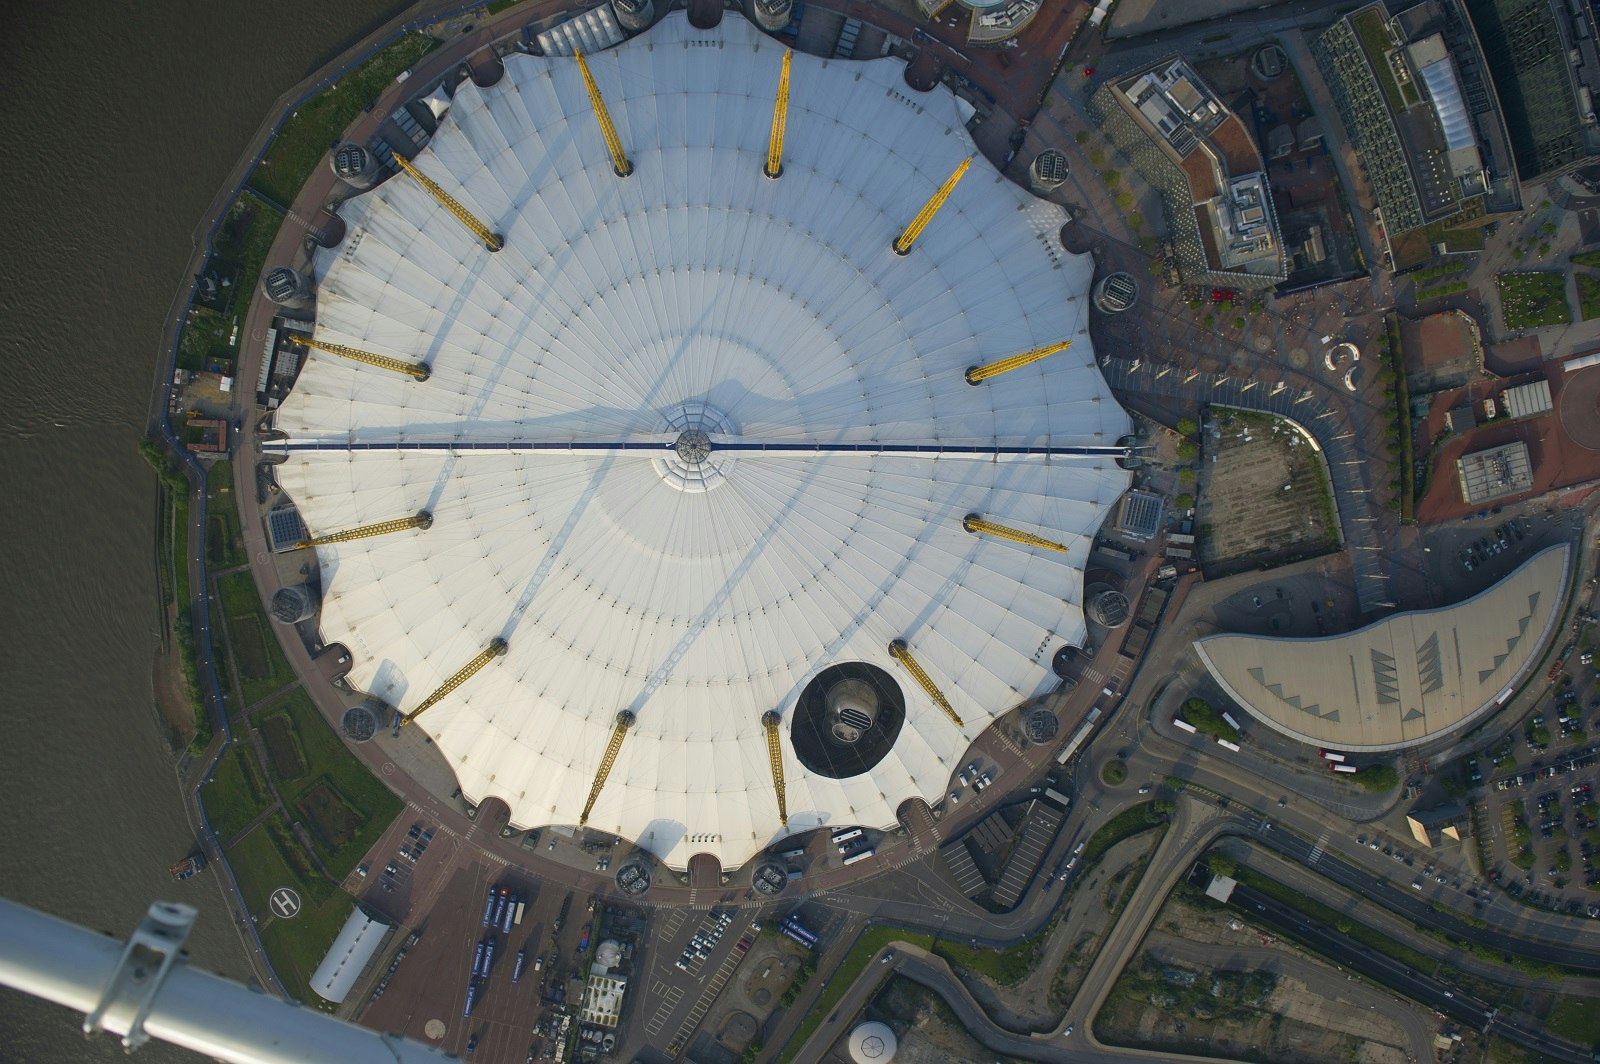 Up at The O2 - The Roof of The O2 image 3